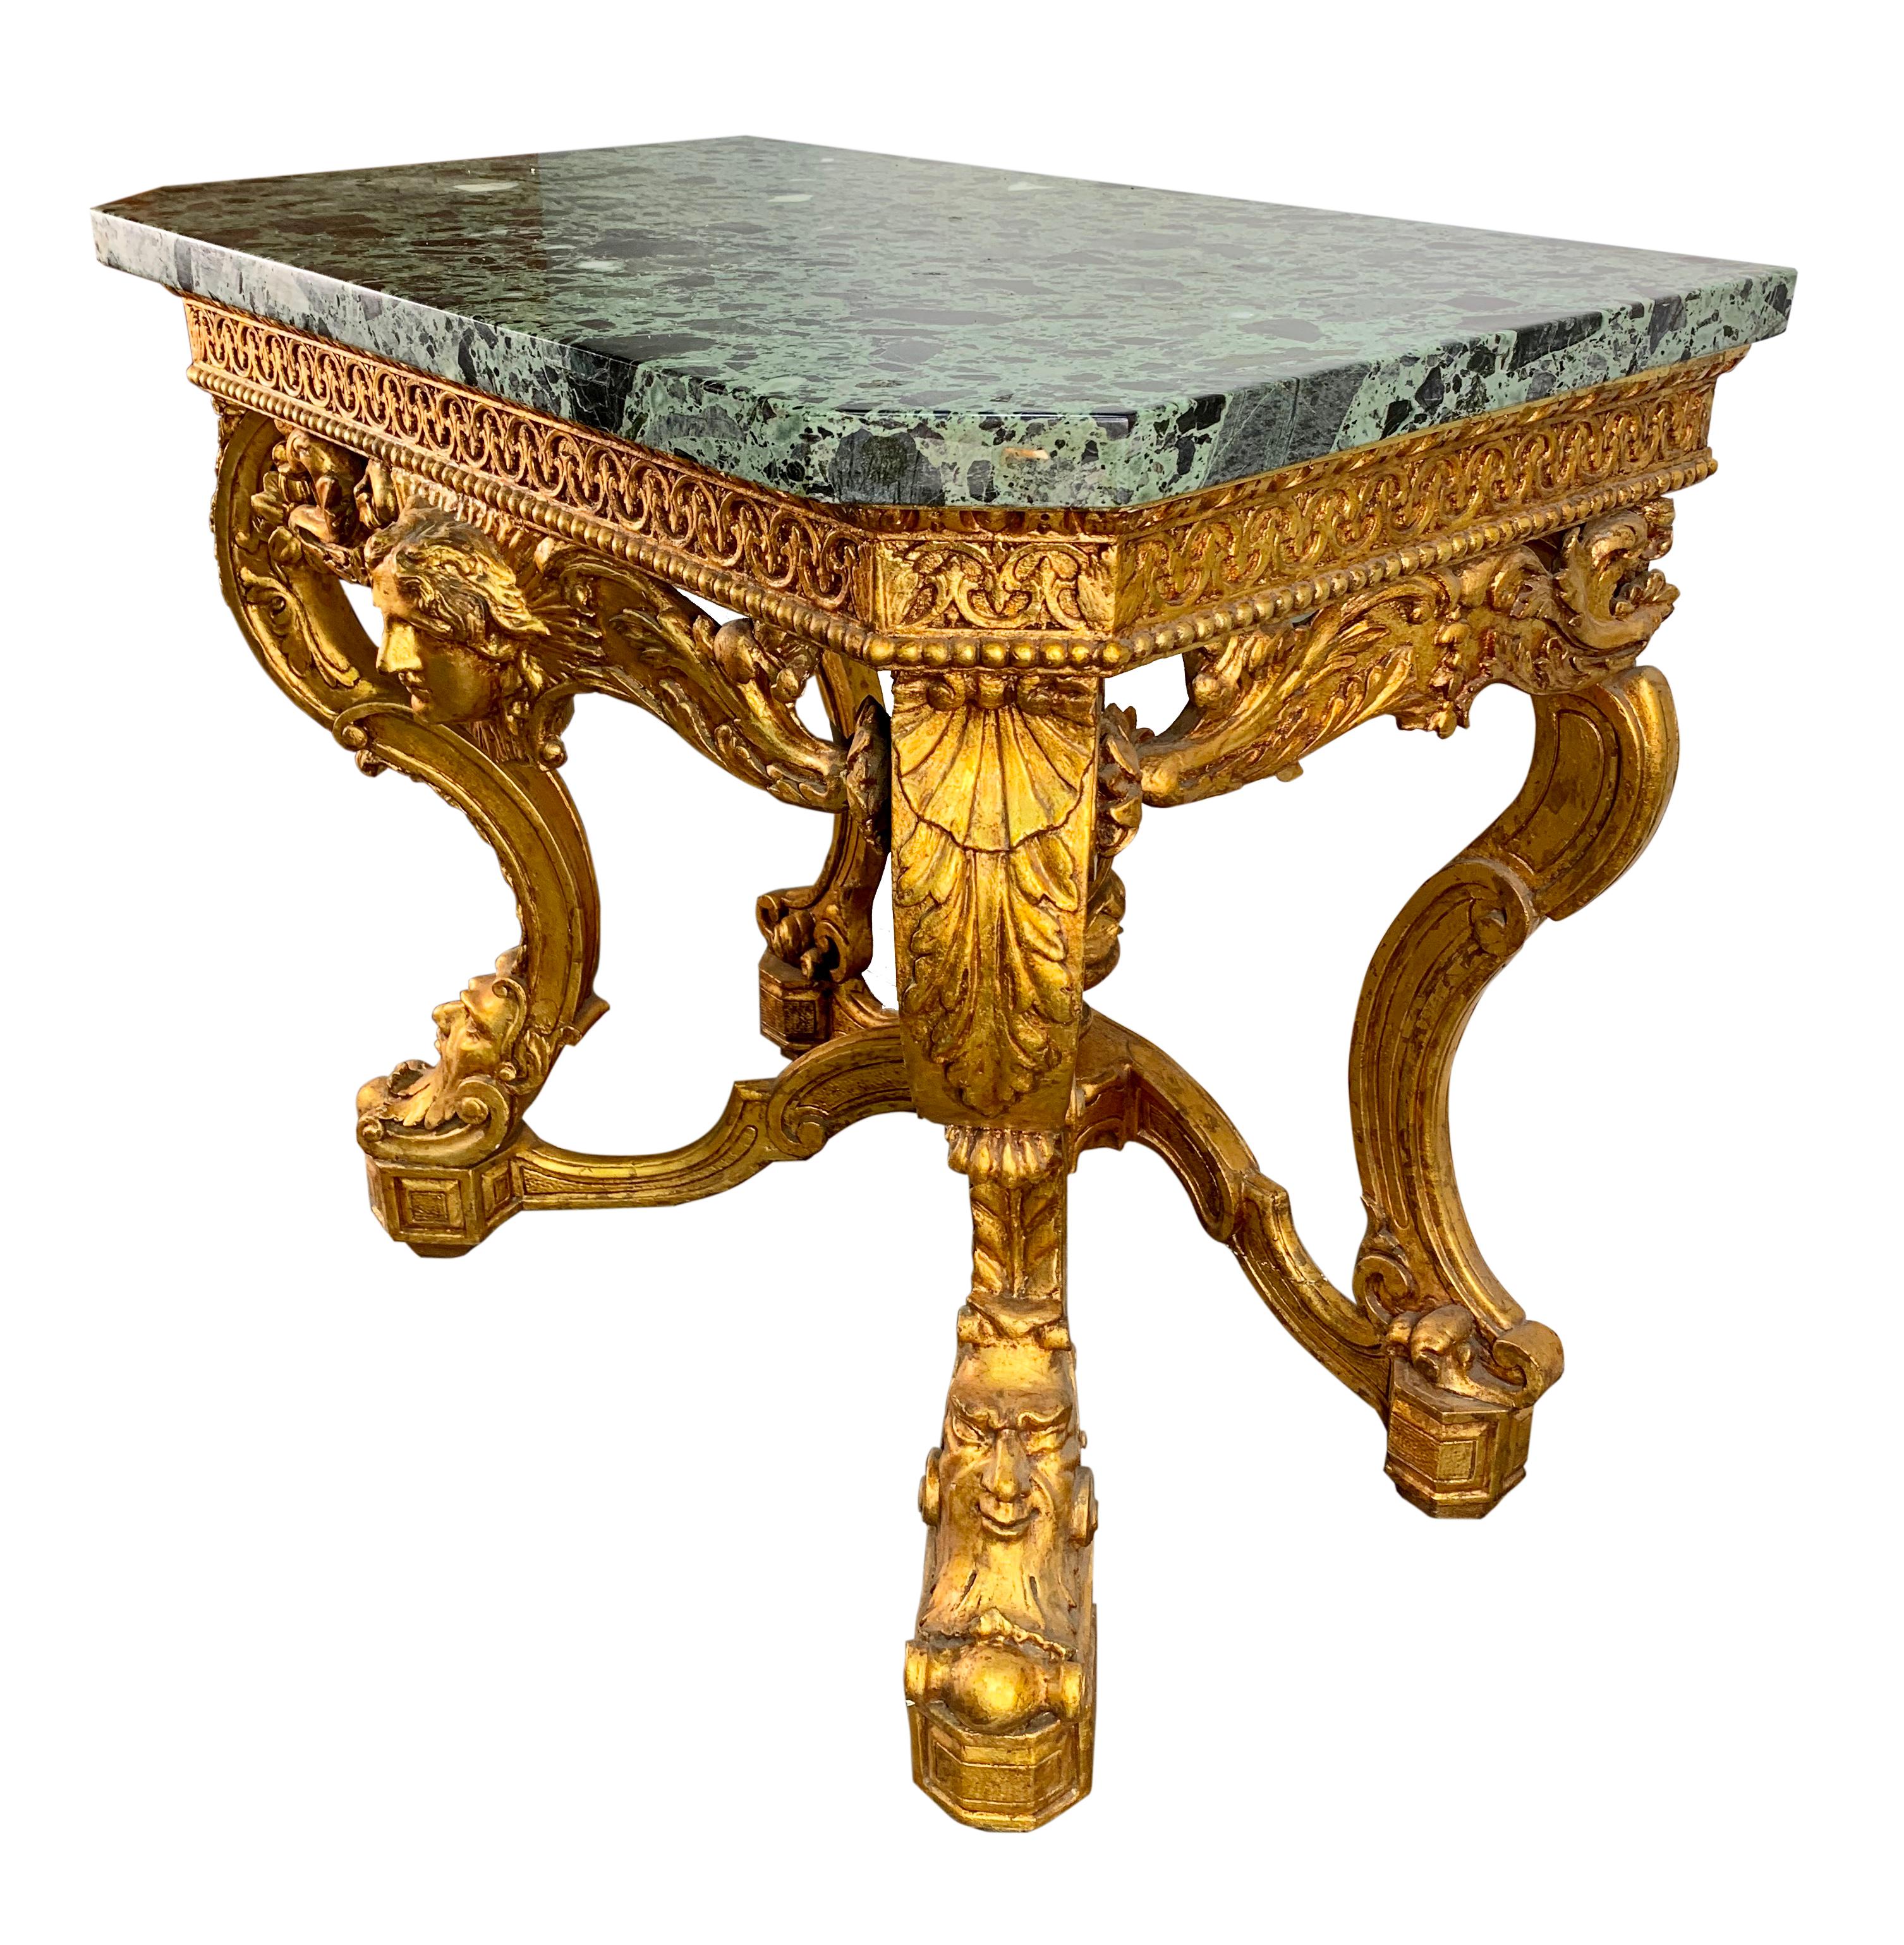 A handsome Italian 19th century carved giltwood console table with Brèche d'Alep marble top. The rectangular form centered by a female mask, raised on four curved form legs inter-joined by a stretcher having a basket with fruit and flower. The